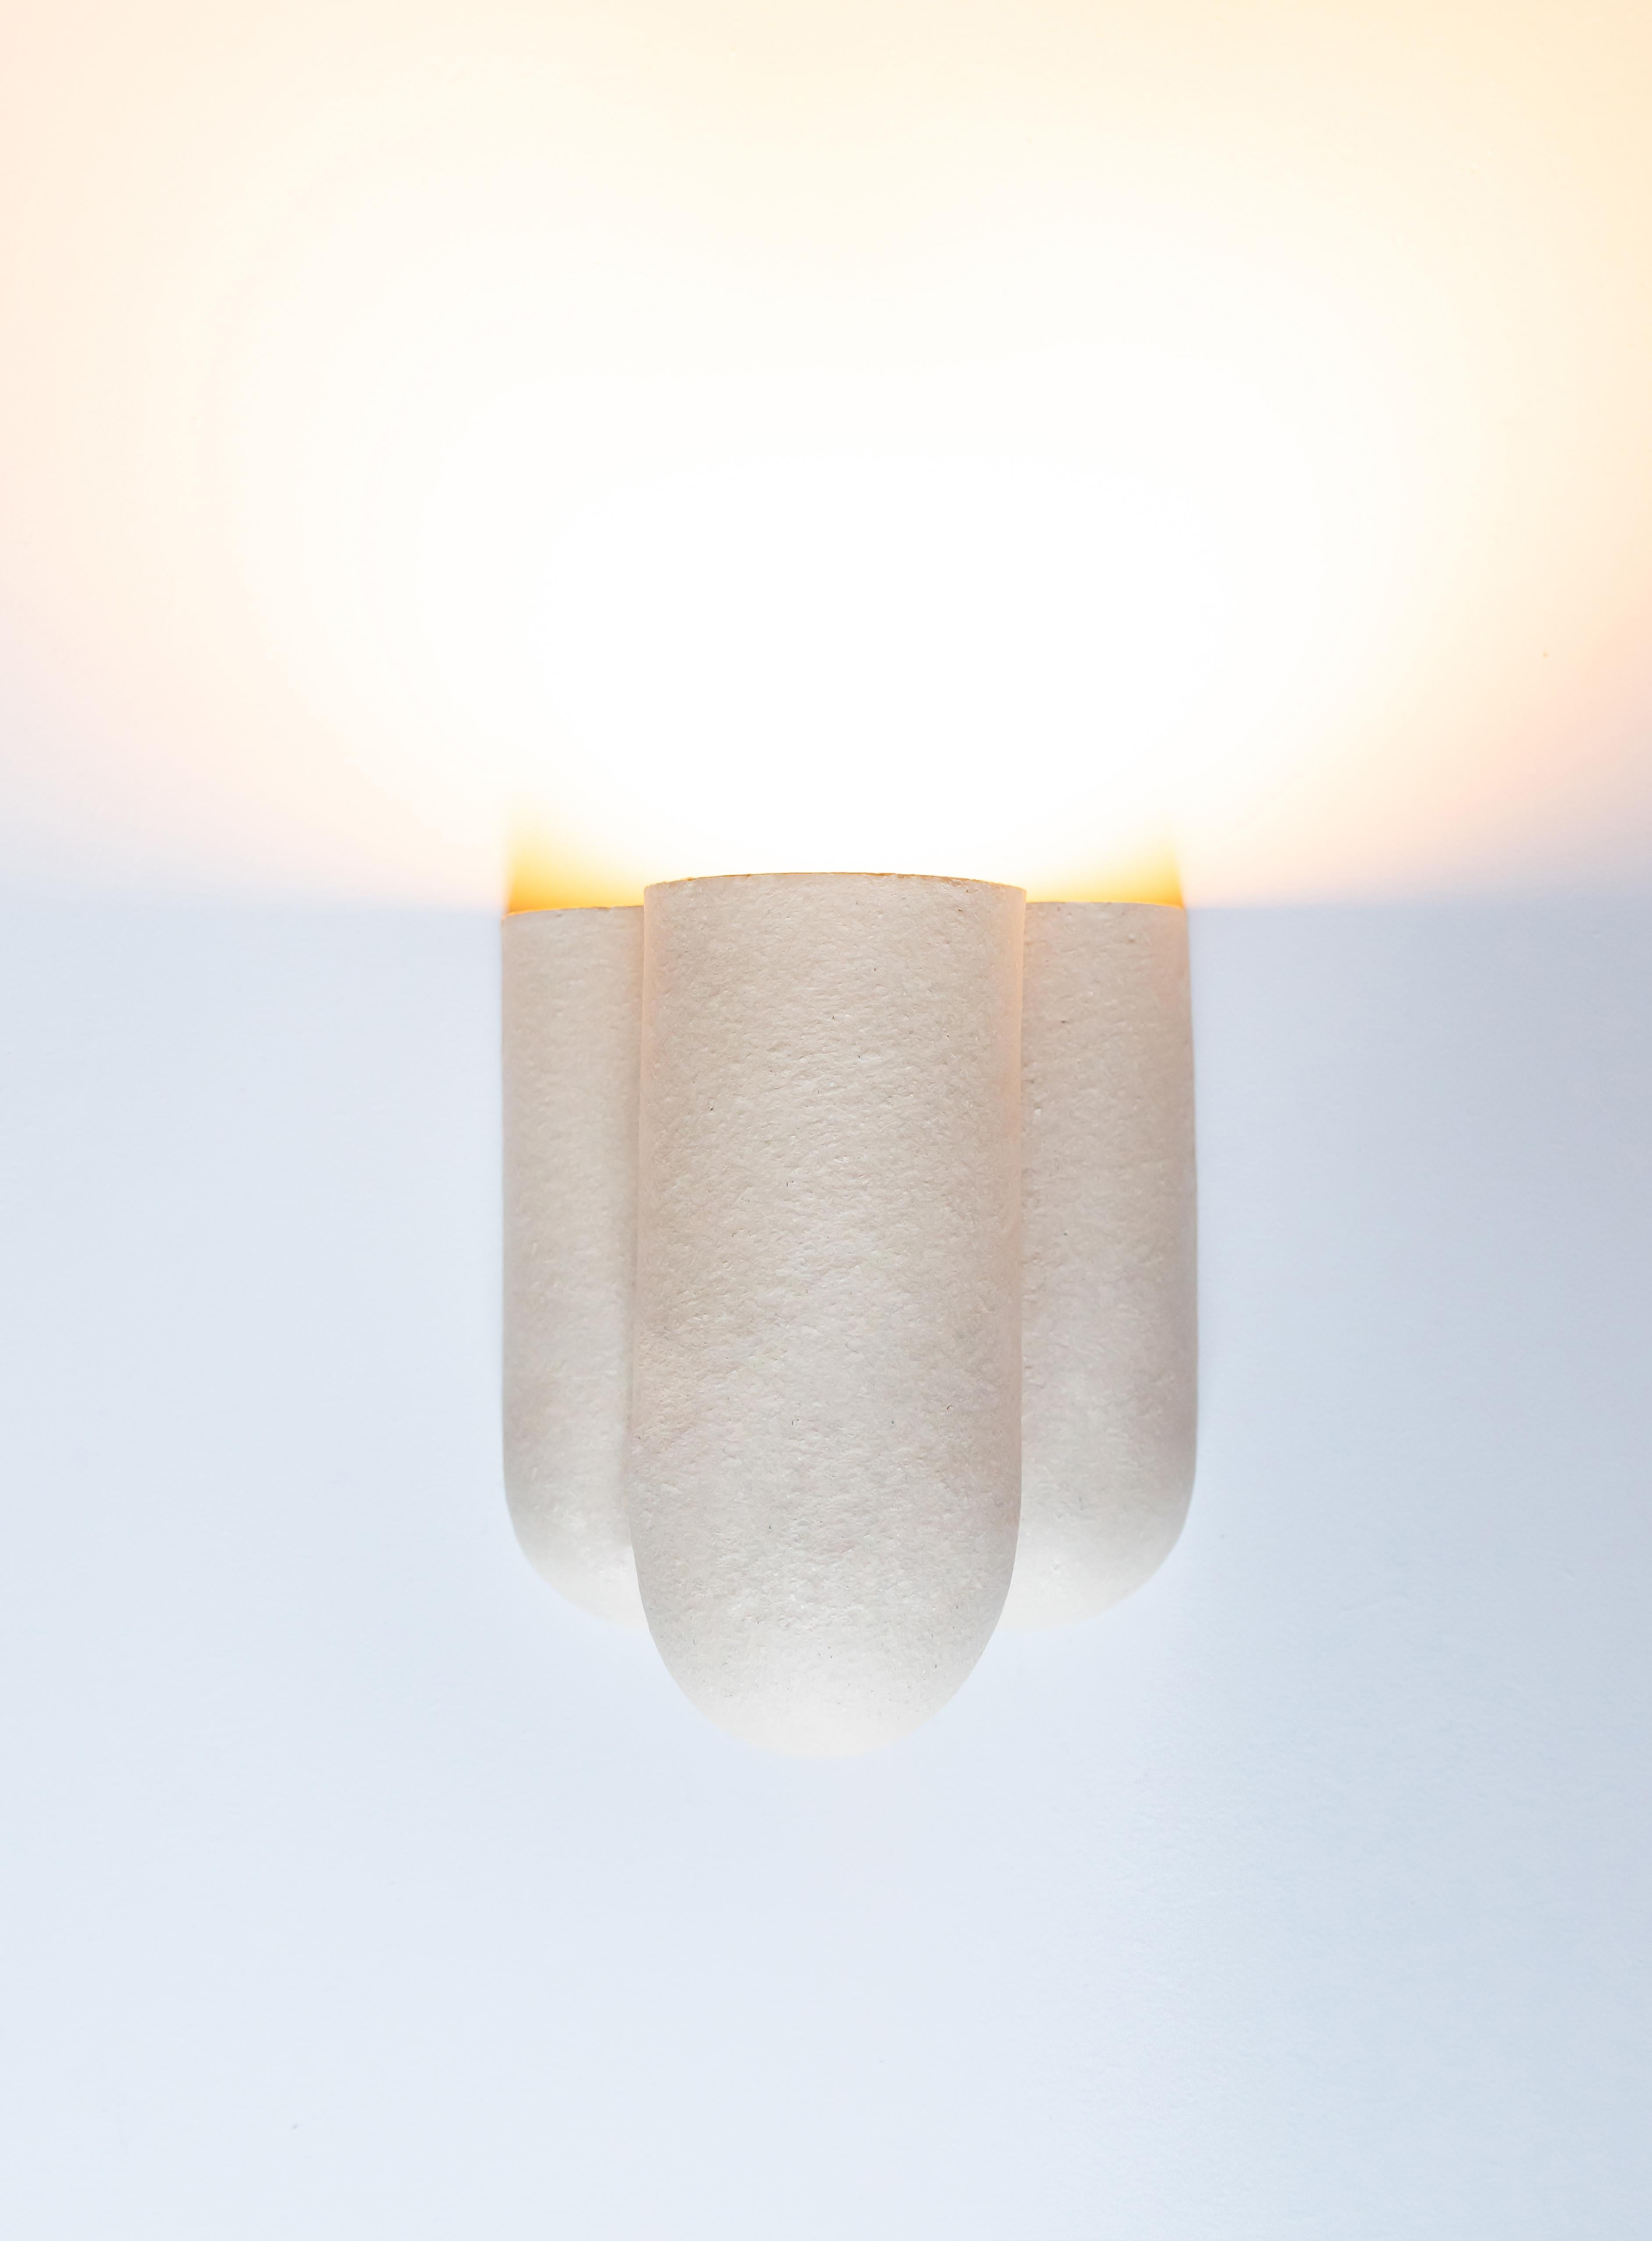 Wall light by Lisa Allegra
Dimensions: W 22.5 x D 17 x H 24 cm
Materials: Clay
Variations available, dusty pink and blackened gold.

Born in 1986 in Paris, Lisa Allegra has earned in 2010 a degree in furniture design from the École Supérieure des